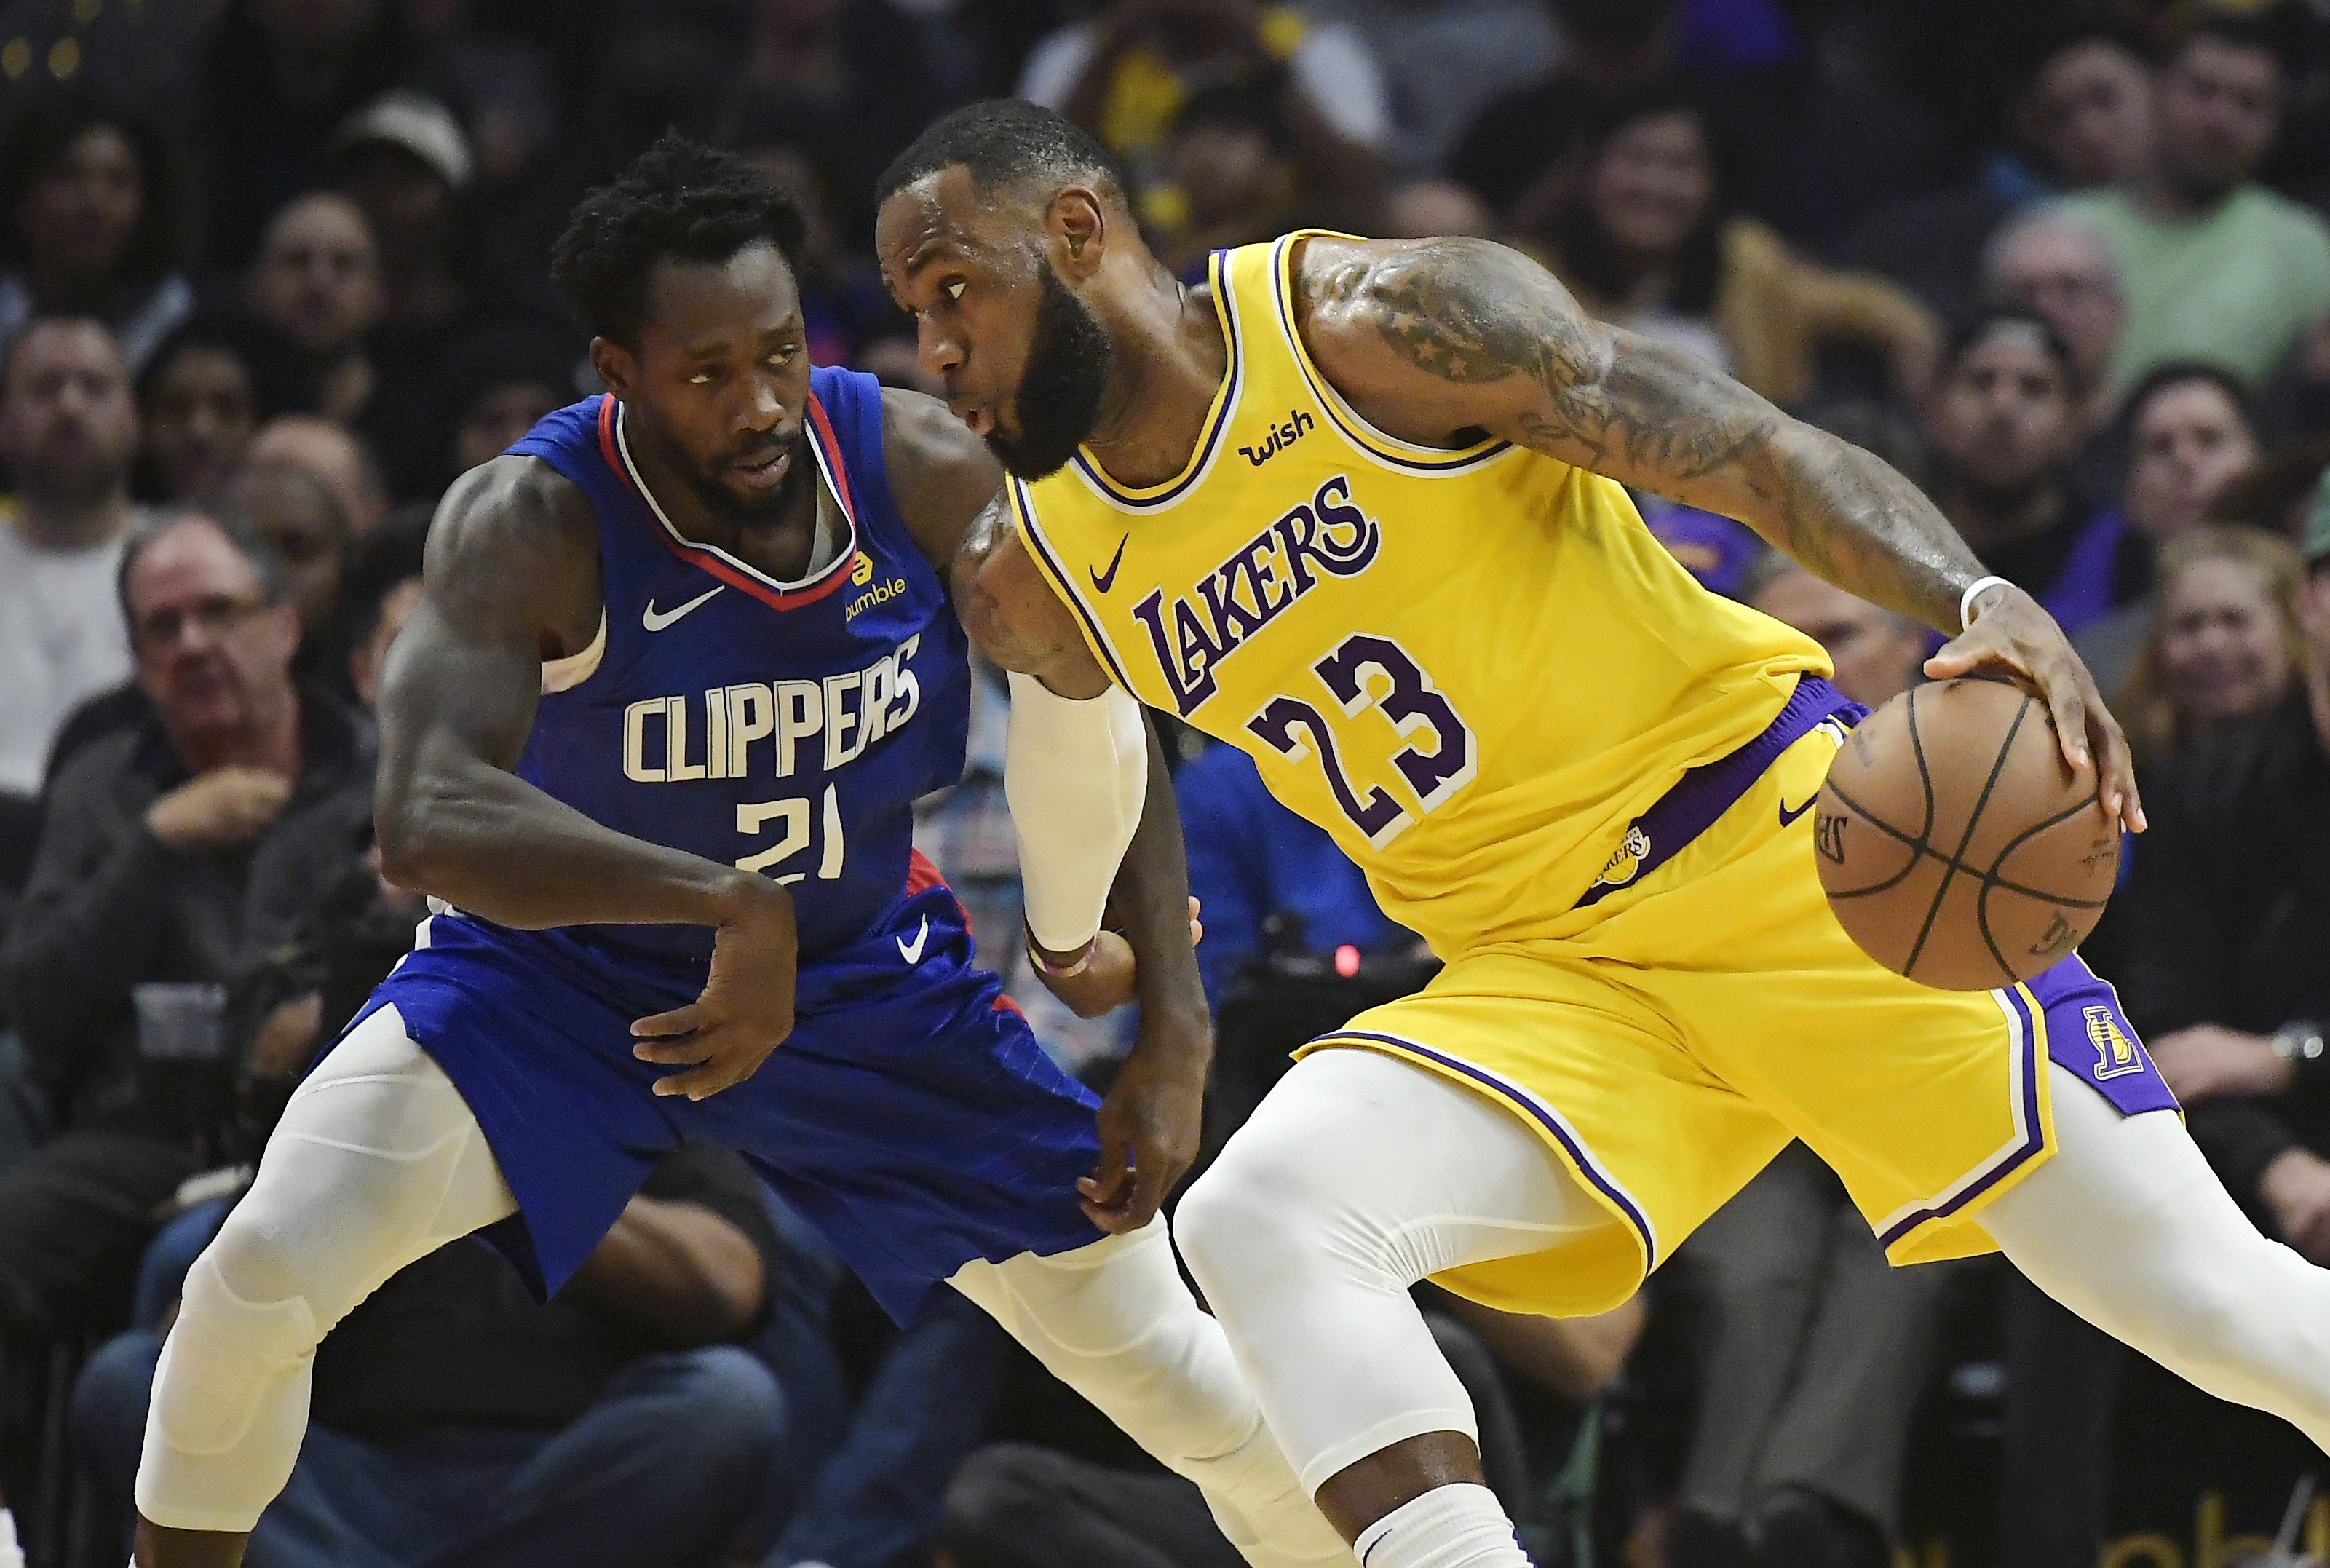 LeBron James Injured in Lakers vs Clippers Game